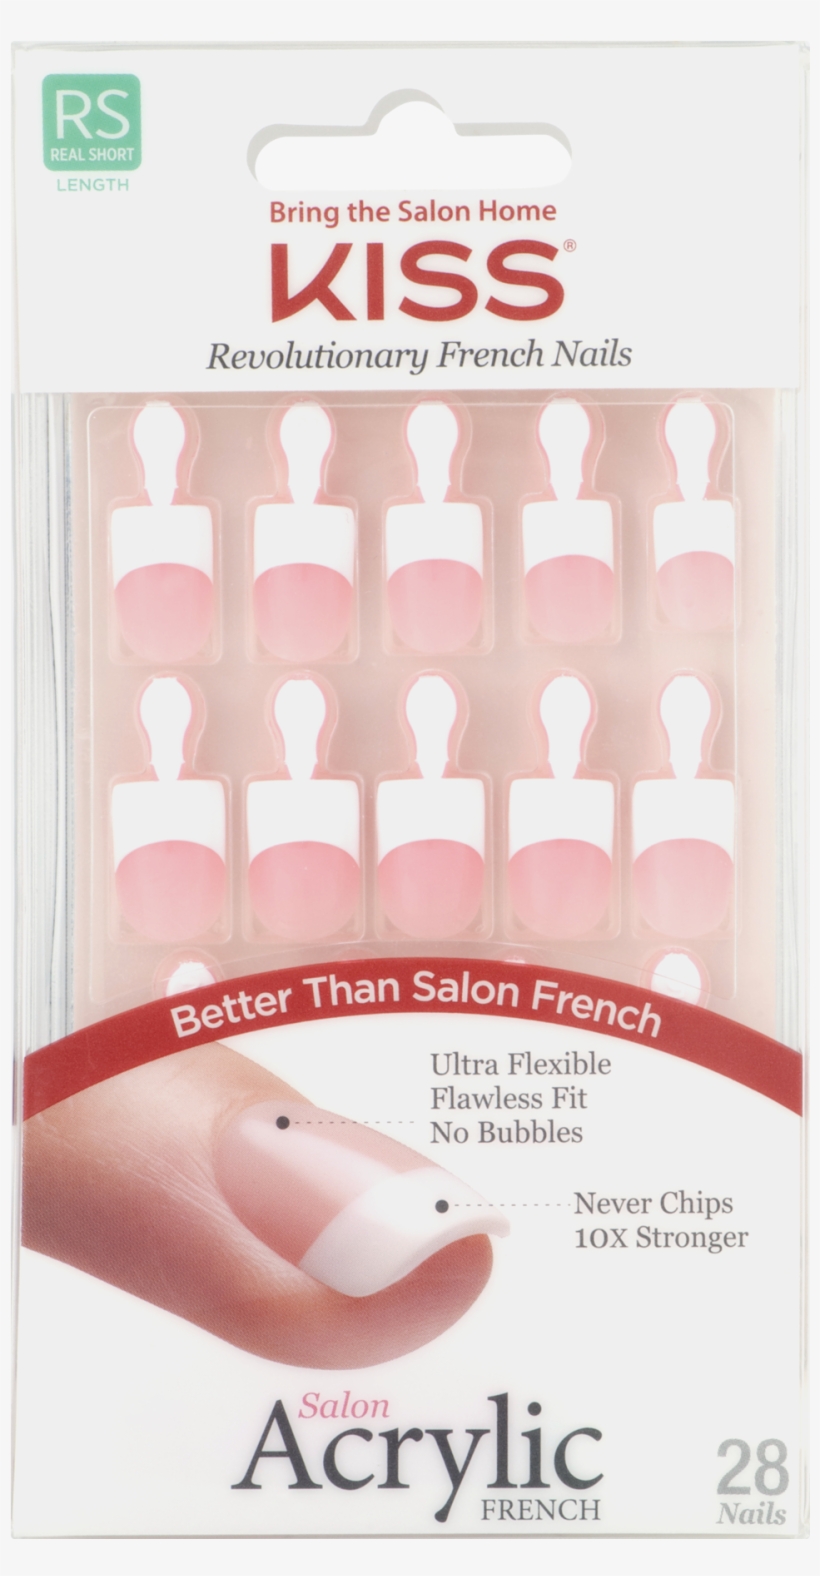 Kiss Revolutionary French Nails Acrylic Real Short - Kiss Nail Kit, Salon Acrylic French, Real Short Length, transparent png #1103885